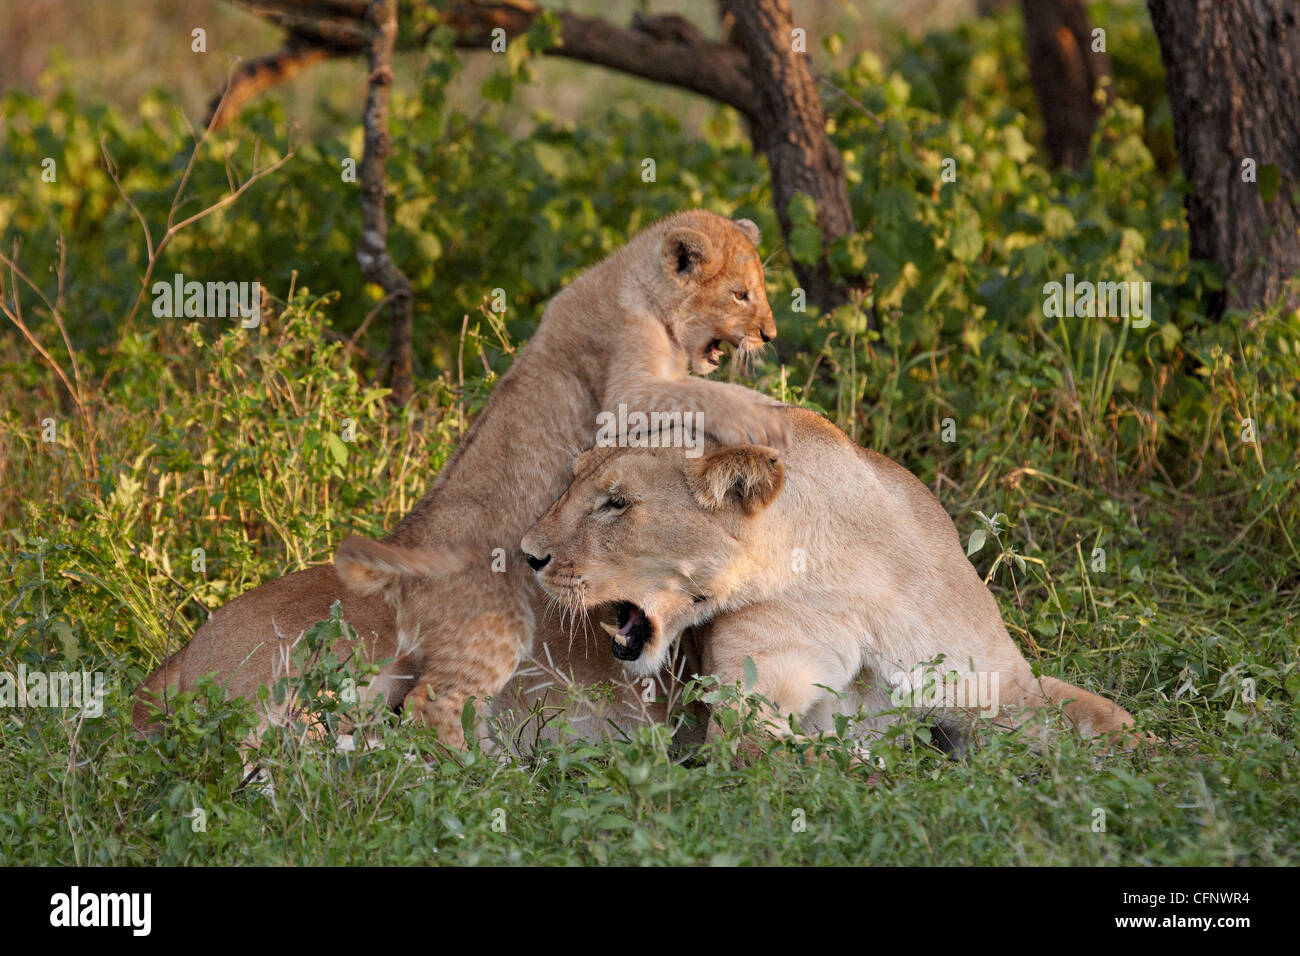 Lion (Panthera leo) cub playing on its mother, Serengeti National Park, Tanzania, East Africa, Africa Stock Photo